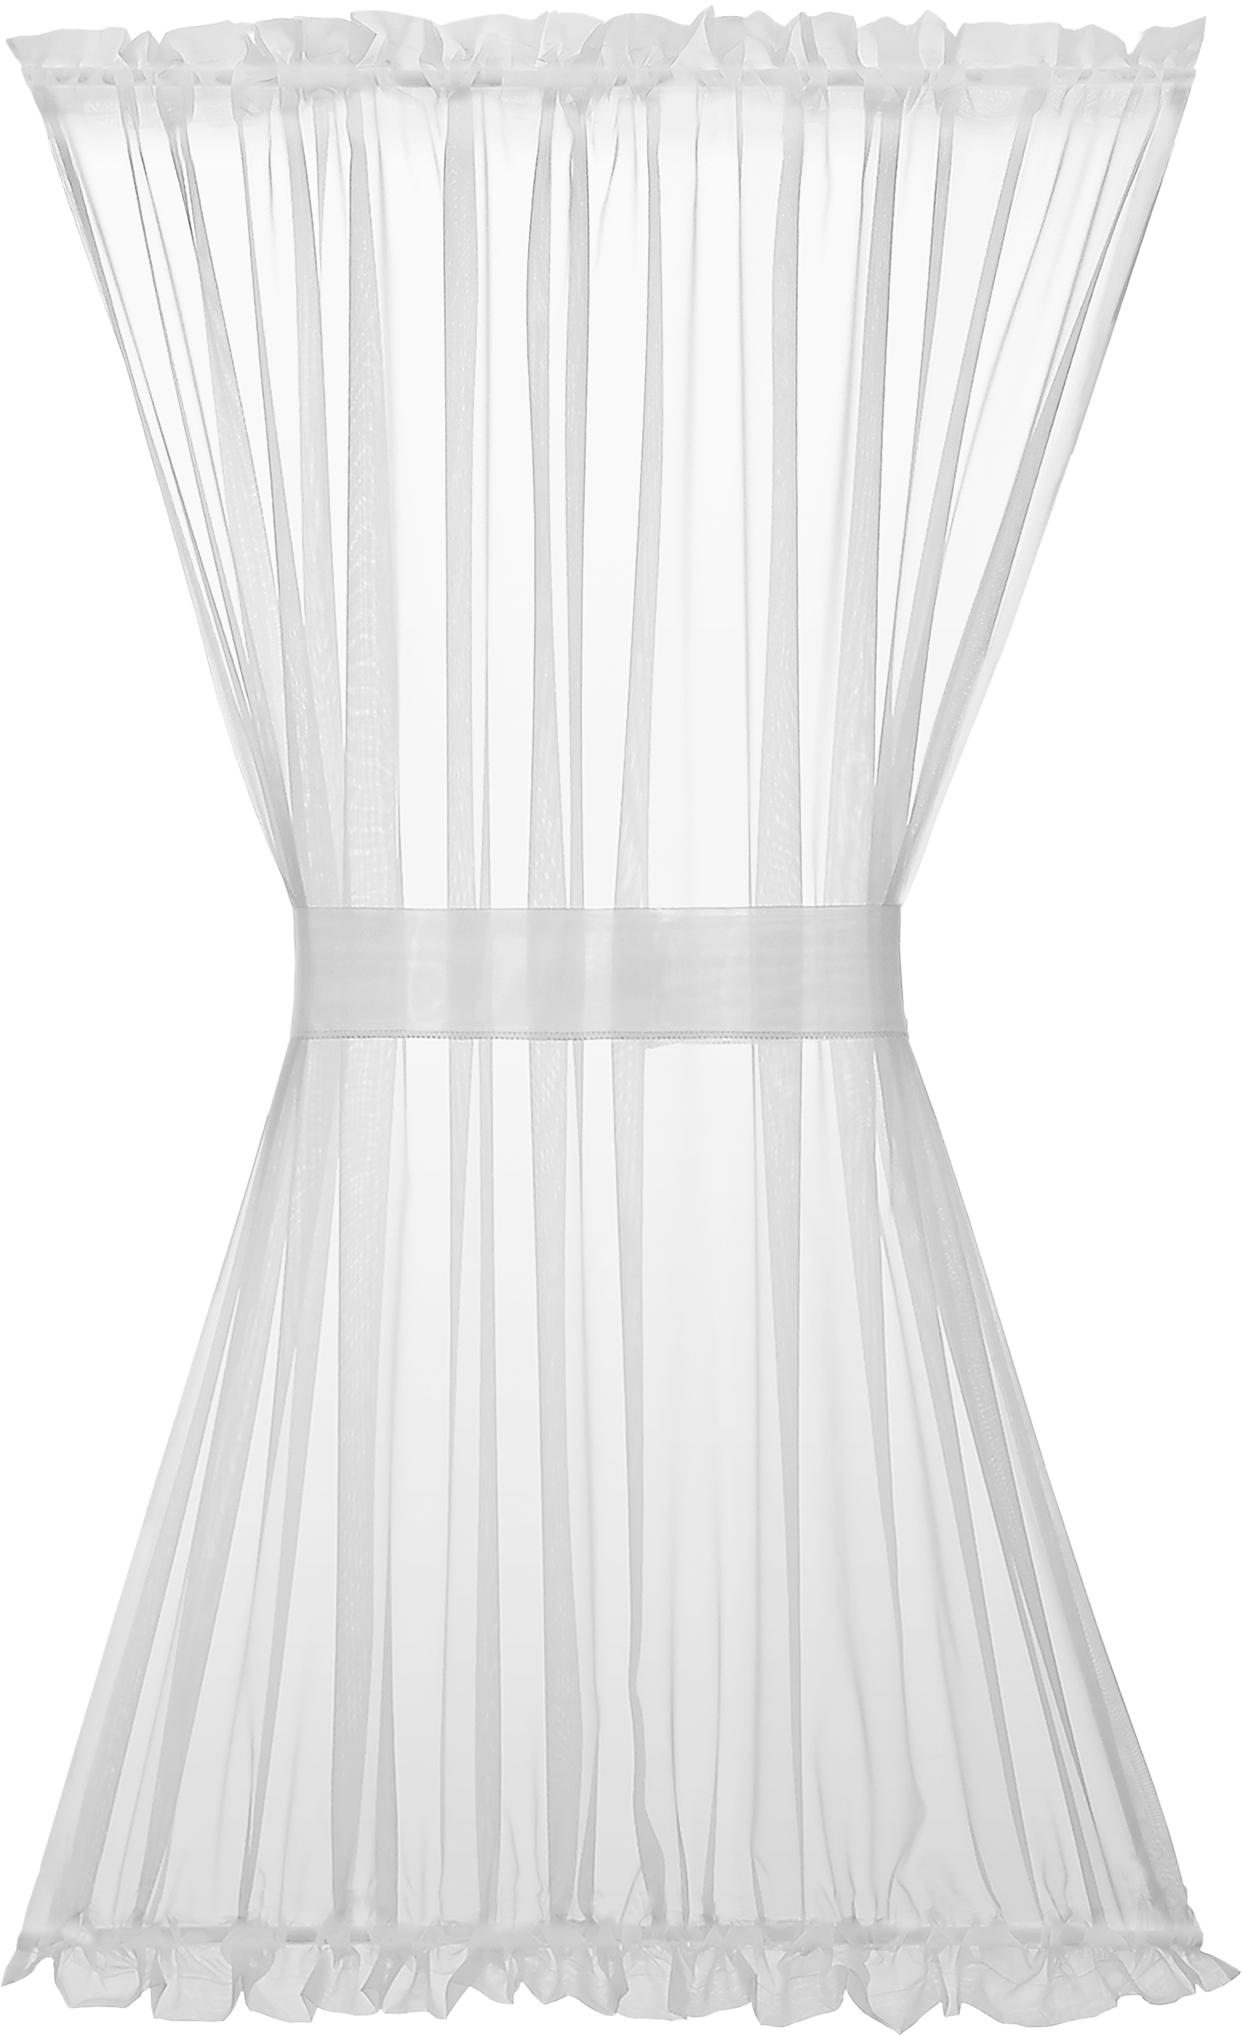 Luxurious Batiste Semi Sheer French Door Curtain Panel with Tieback (White, 45 in.) - image 2 of 2